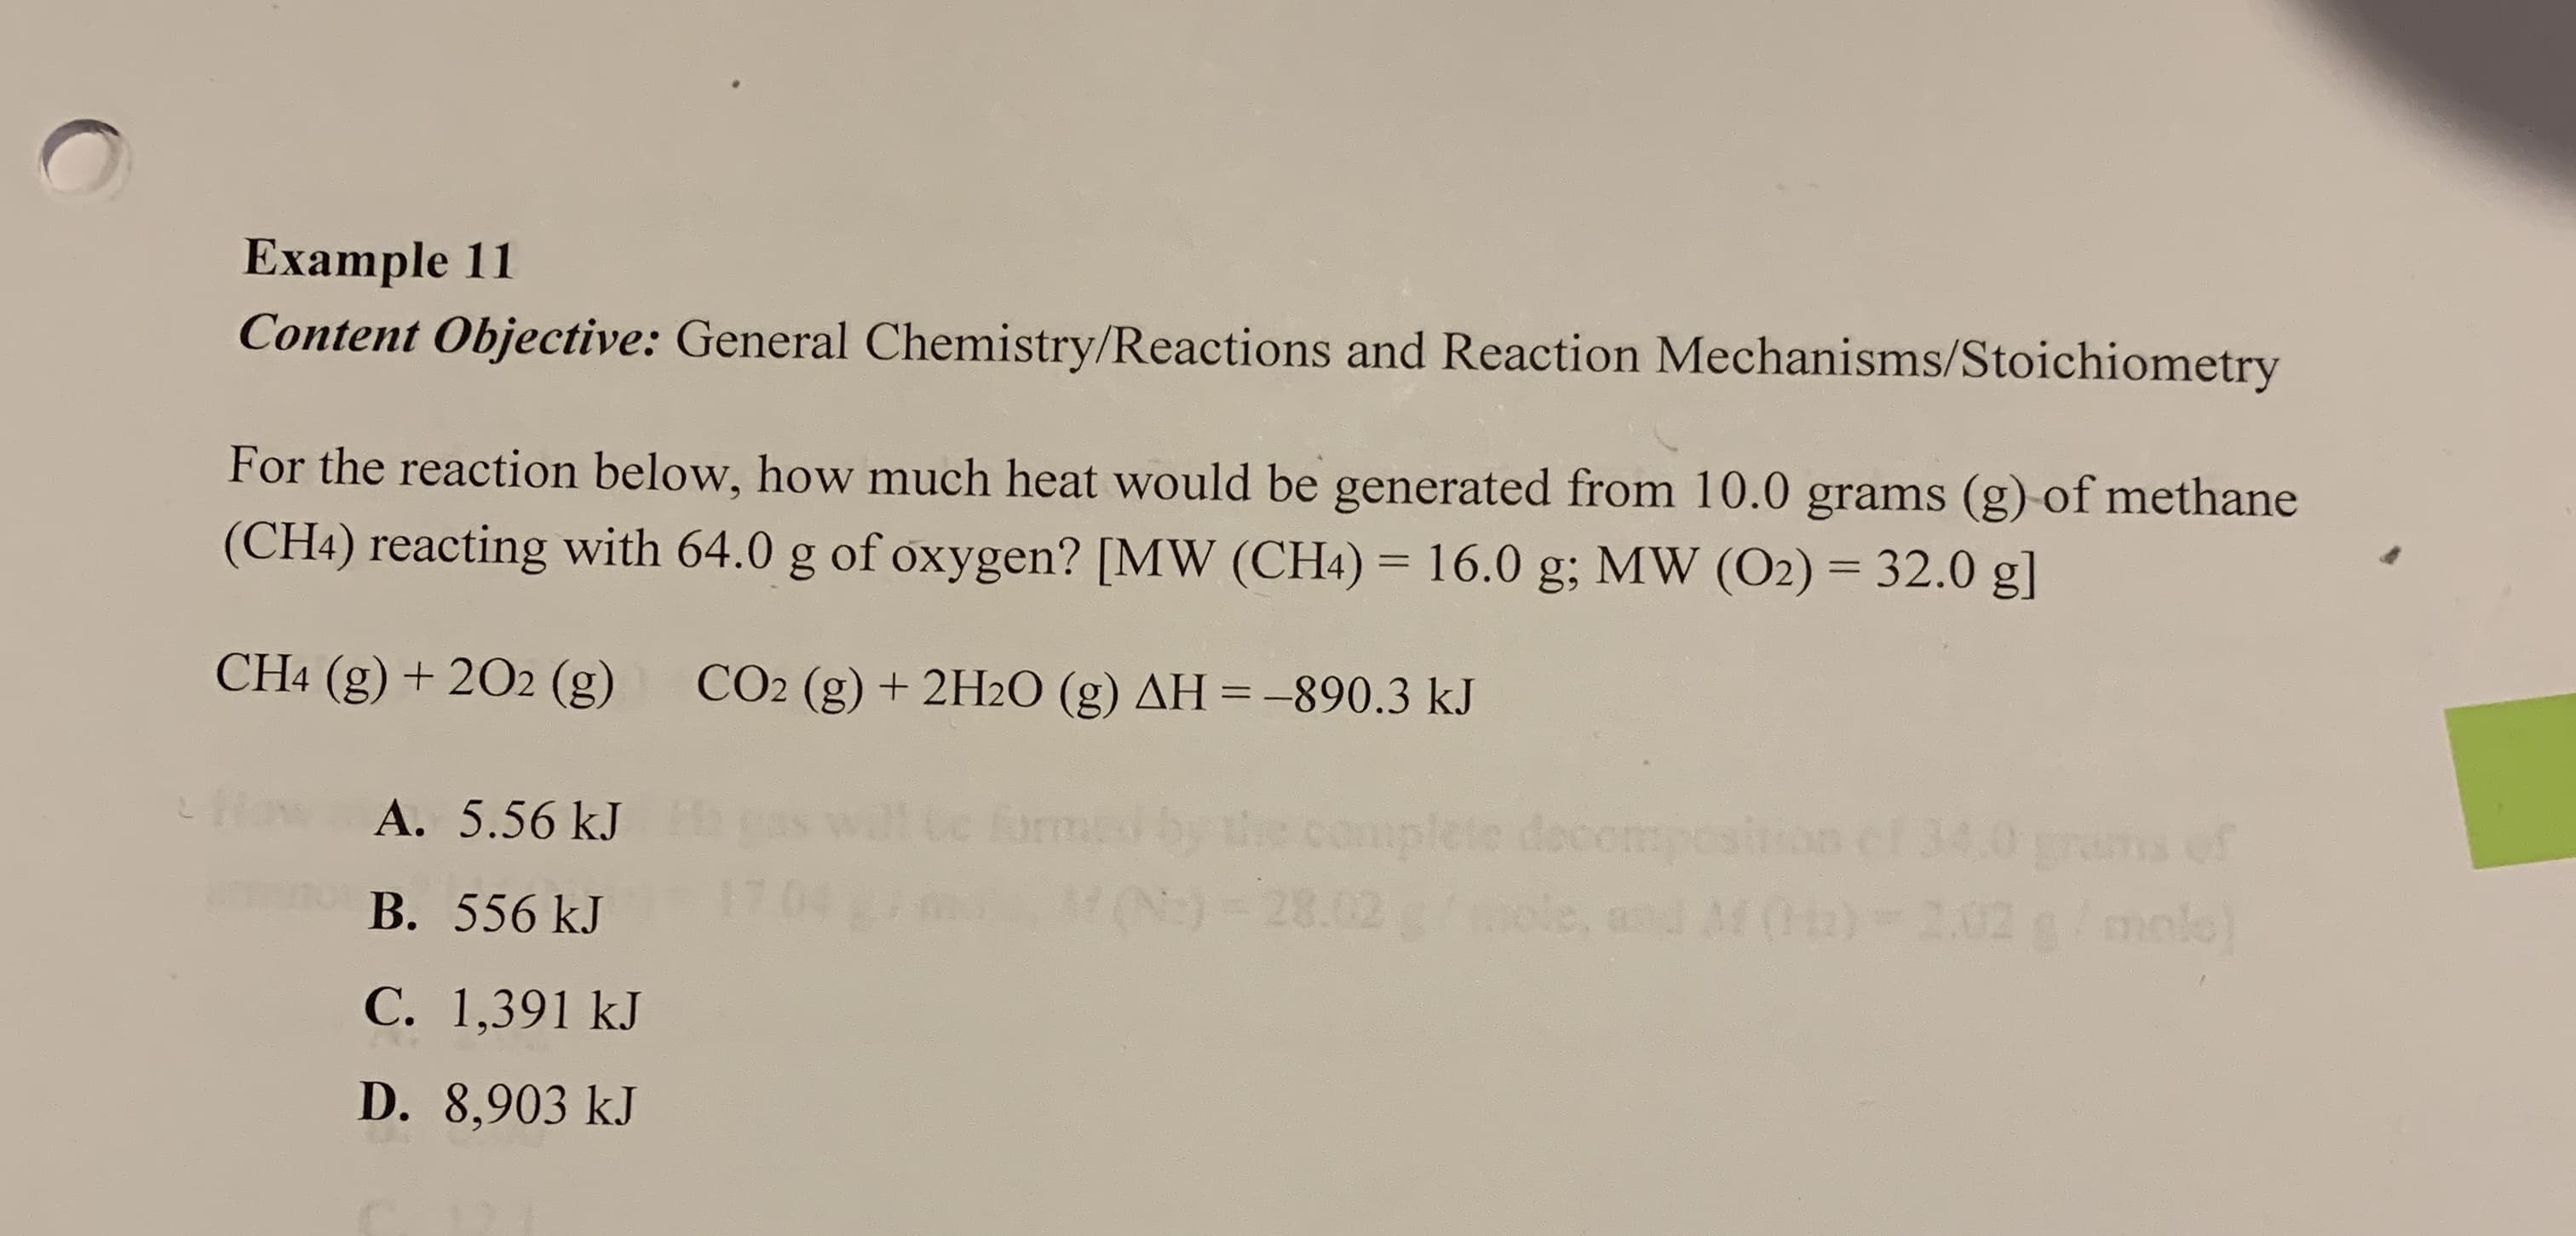 Example 11
Content Objective: General Chemistry/Reactions and Reaction Mechanisms/Stoichiometry
For the reaction below, how much heat would be generated from 10.0 grams (g) of methane
32.0 g]
(CH4) reacting with 64.0 g of oxygen? [MW (CH4) 16.0 g; MW (O2)
CH4 (g) +202 (g)
CO2 (g)+2H20 (g) AH =-890.3 kJ
complete dsirion ef 34.0 ans of
eoompe
120)-28.02 bole, and M0)-2.02 a/ mol
02 100016.
orme
How A. 5.56 kJ
В. 556 kJ
С. 1,391 kJ
D. 8,903 kJ
